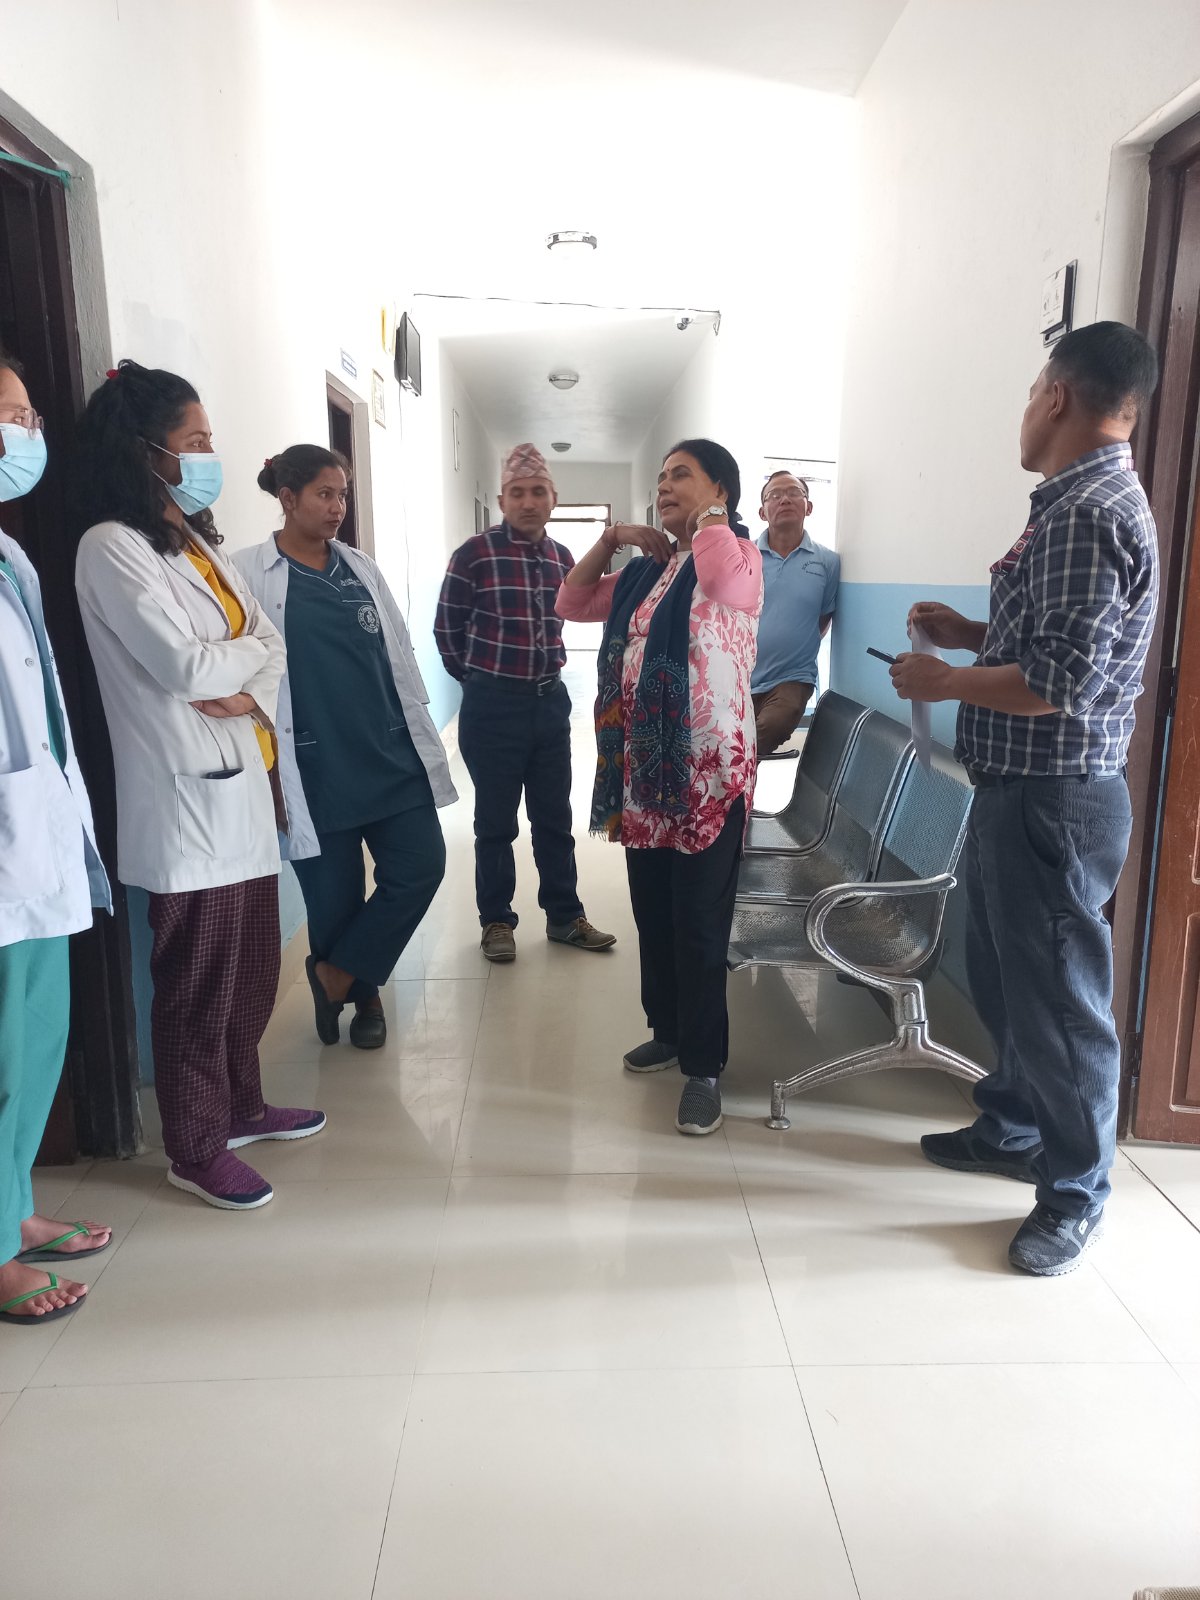 District Health Officers of Kavrepalanchok visited and inspected the services given by DCWC Community Hospital